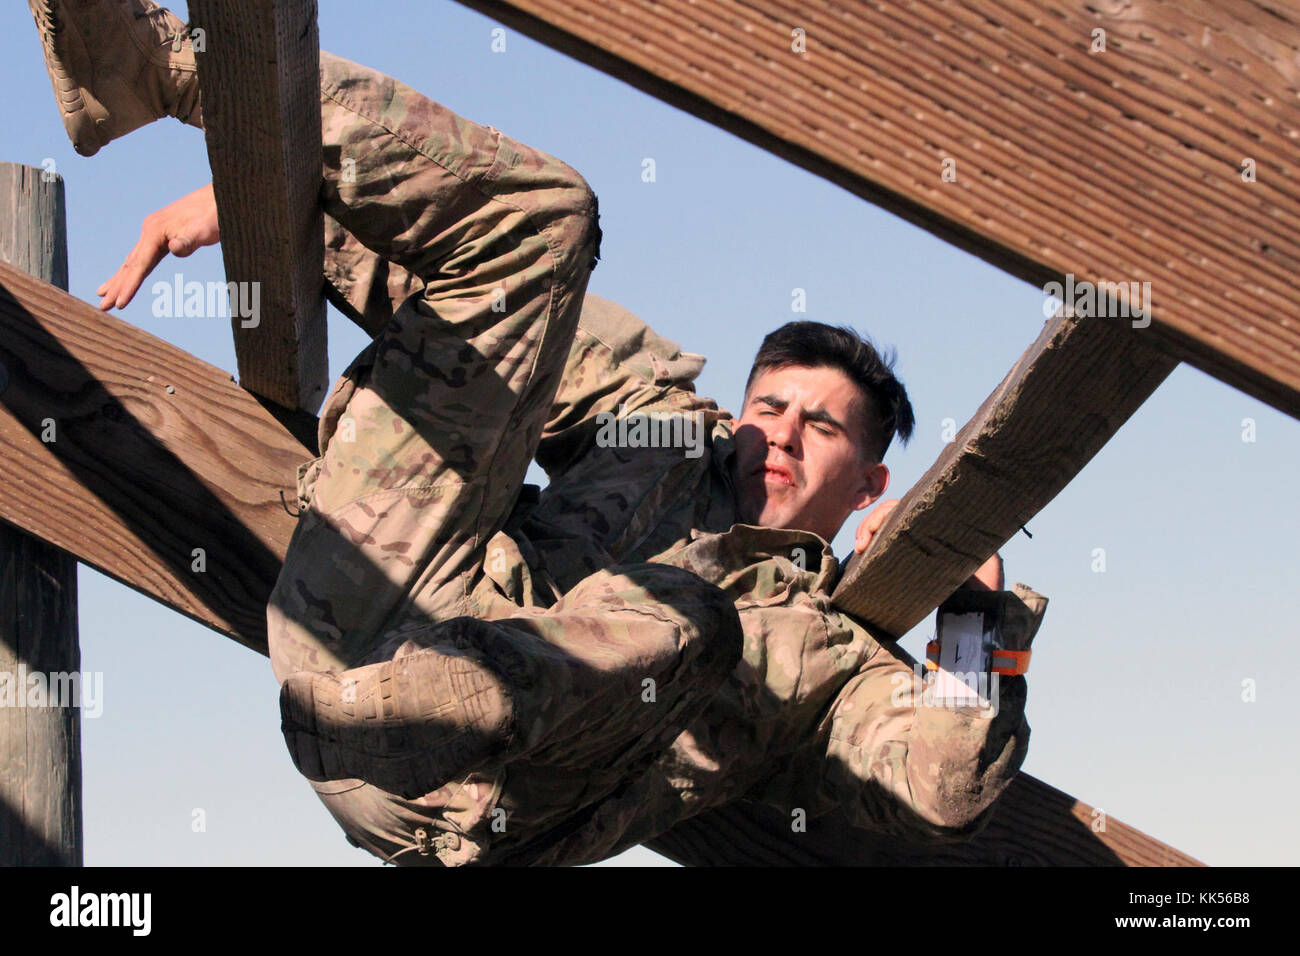 Spc. David Enriquez-Ortiz works his way through The Weave, an overhead challenge in the obstacle course of the California Army National Guard's 2017-18 Best Warrior Competition at Camp San Luis Obispo, California. (Army National Guard photo by Staff Sgt. Eddie Siguenza) Stock Photo